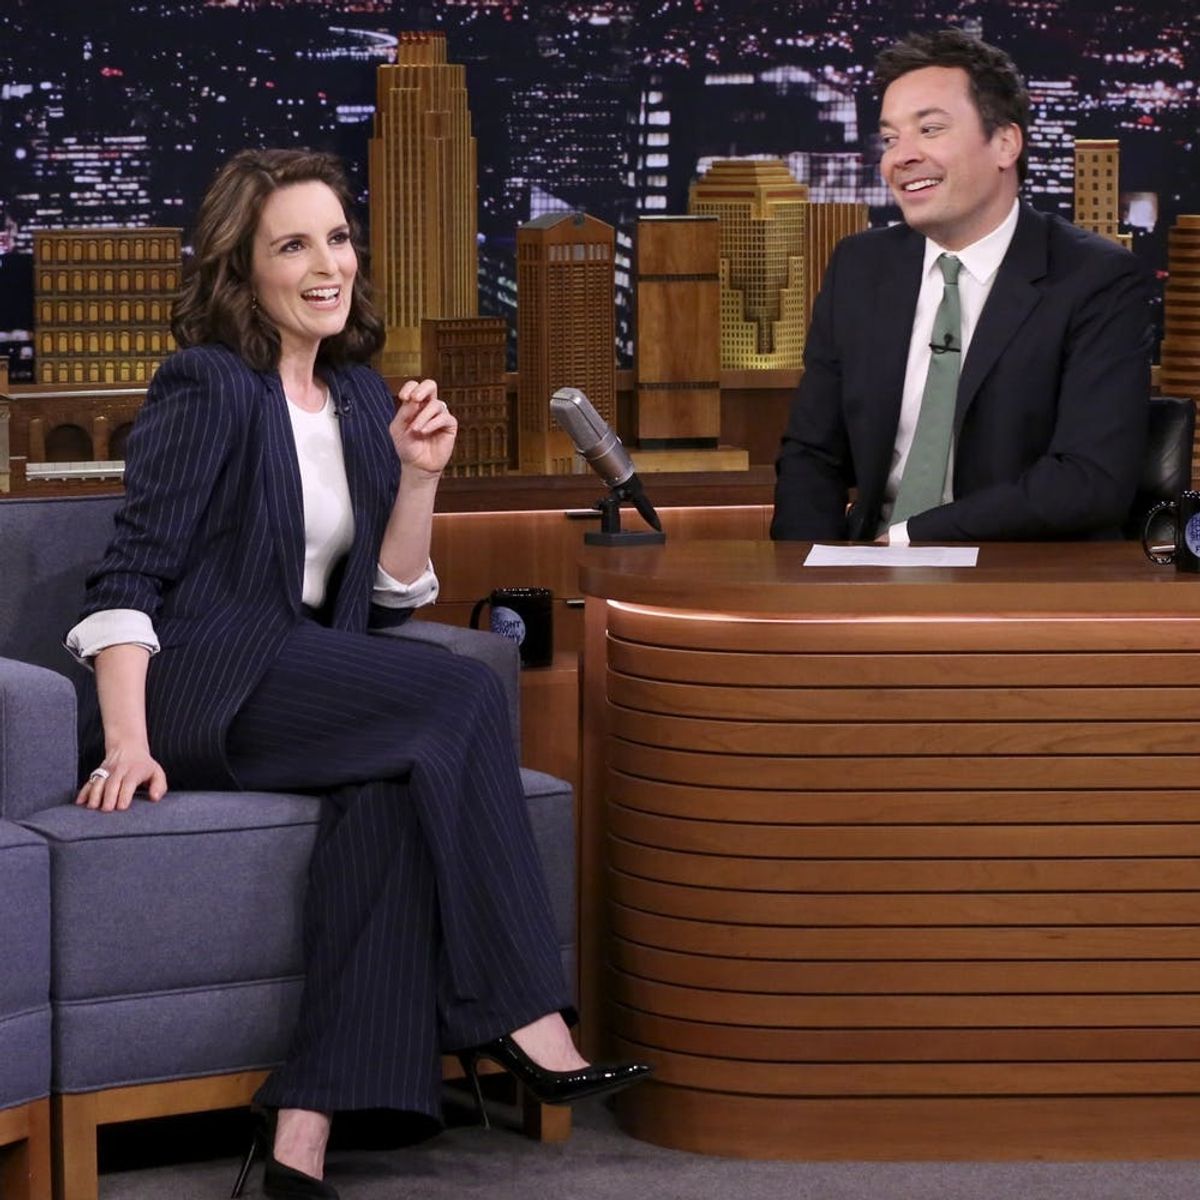 Tina Fey Surprising Fans With Jimmy Fallon Is the Best Thing You’ll See Today